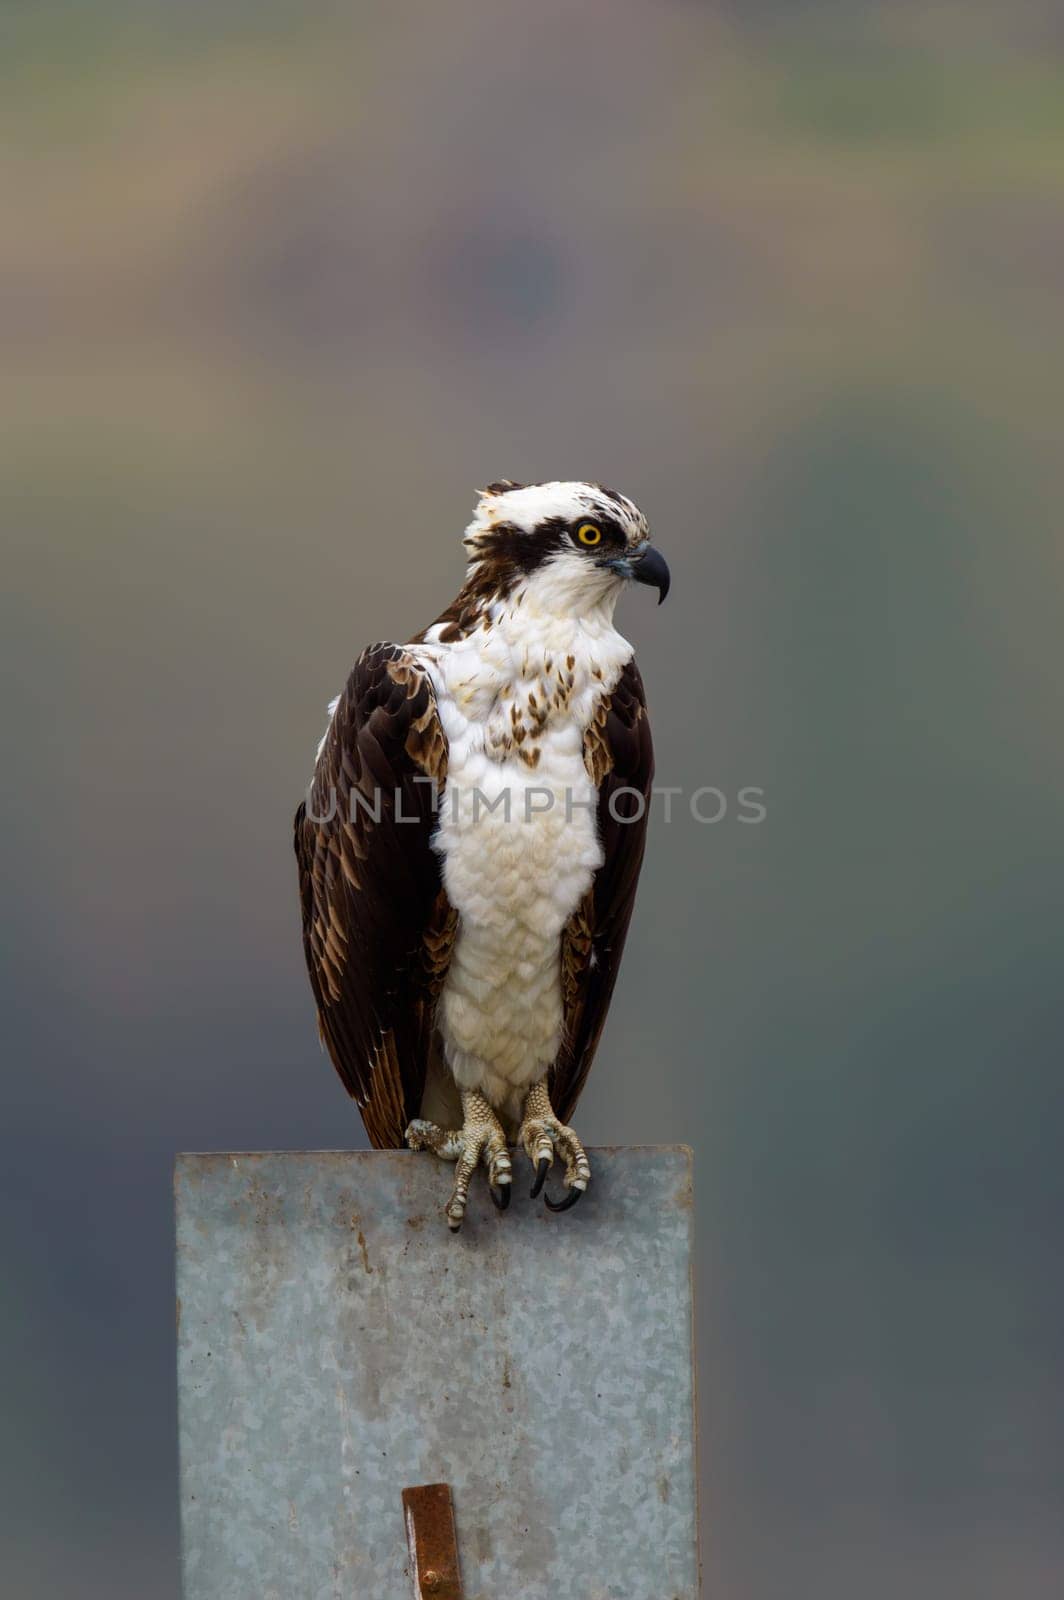 Osprey Fish Hawk Perched on Metal Sign in Tijuana, Mexico by RobertPB